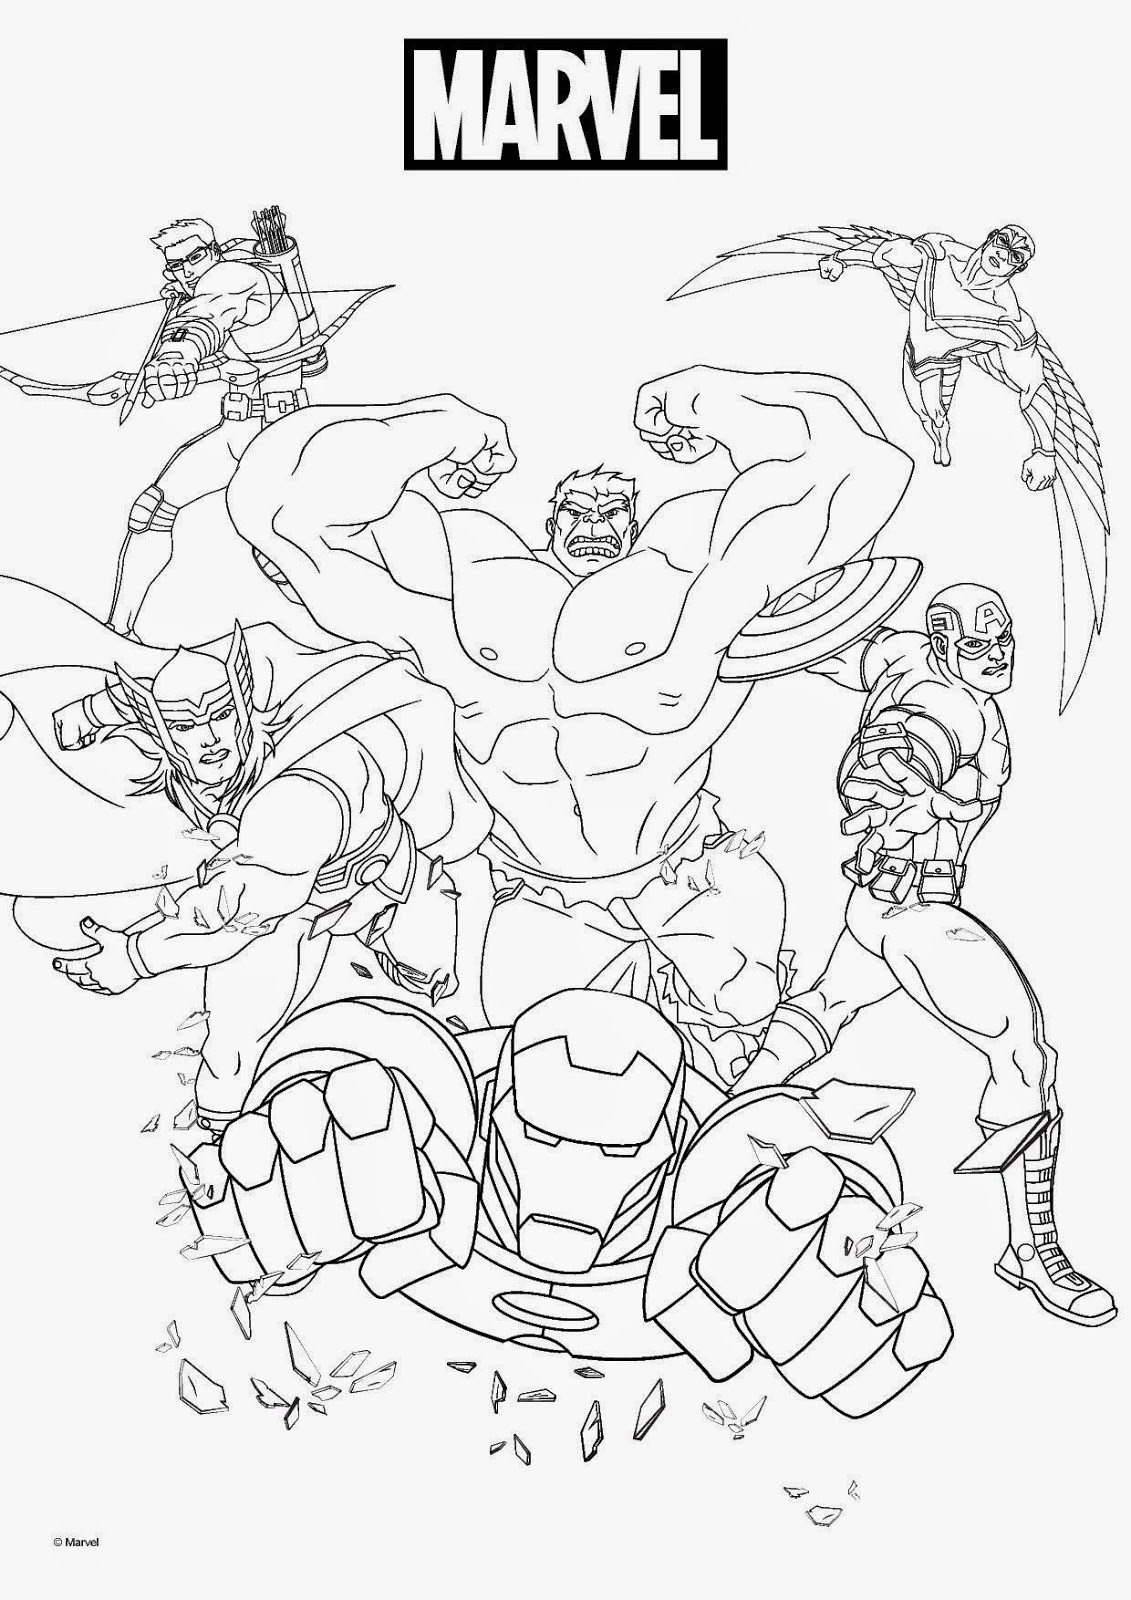 Marvel Printable Coloring Pages
 Marvel Coloring Pages Best Coloring Pages For Kids